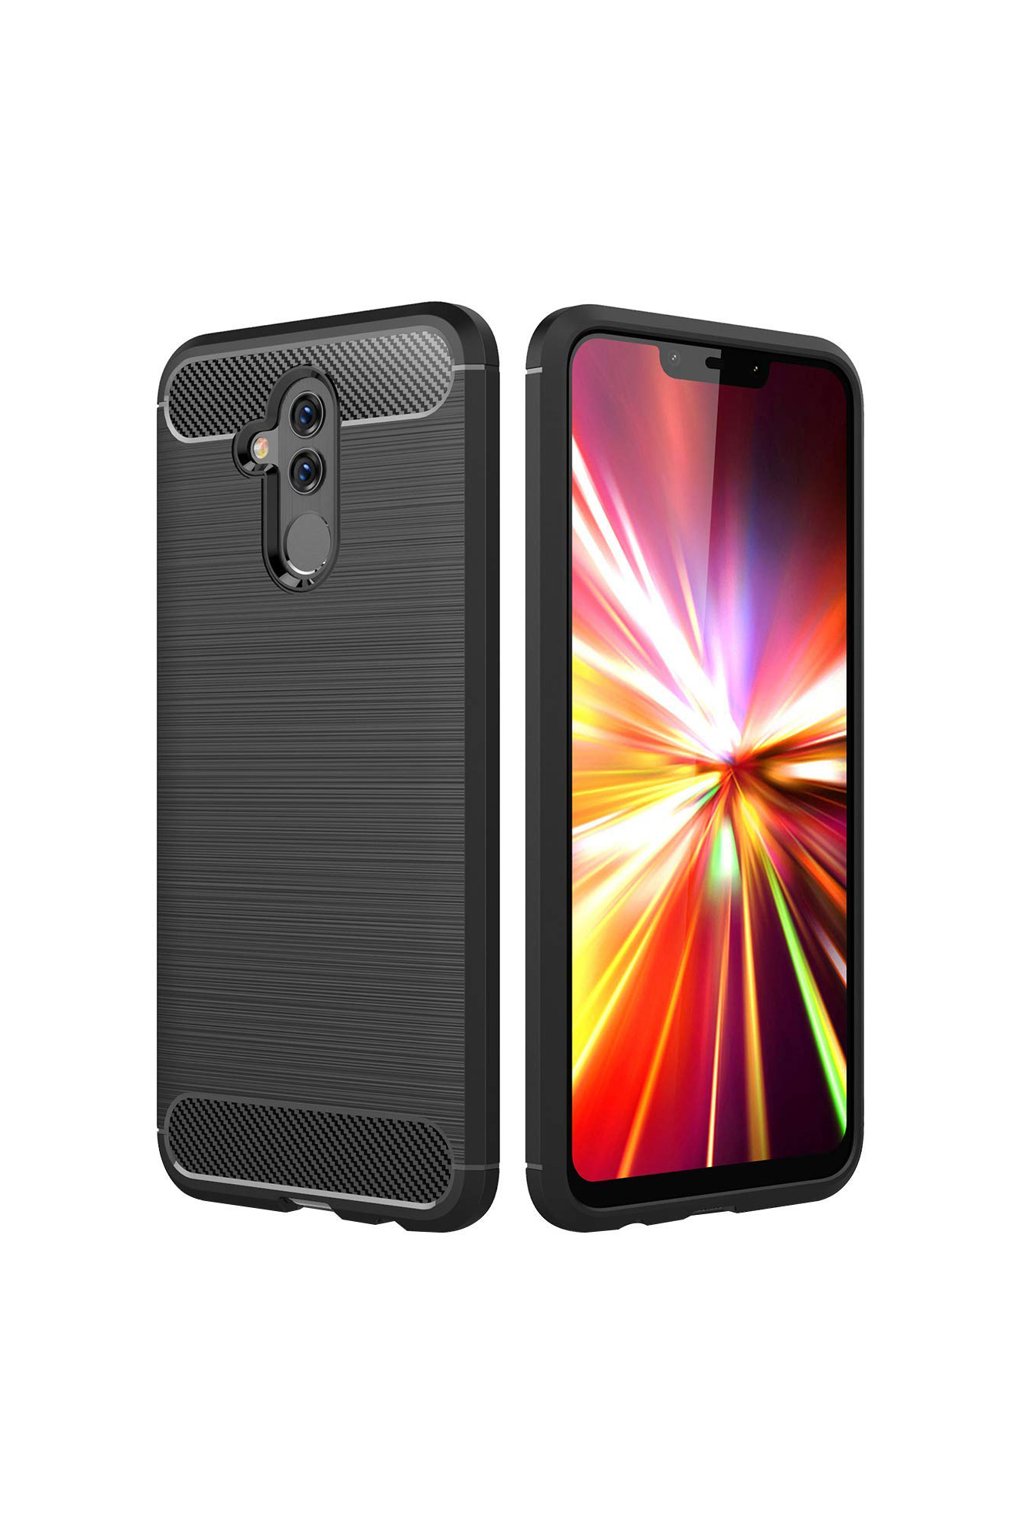 eng pl Carbon Case Flexible Cover TPU Case for Huawei Mate 20 Lite black 43242 1